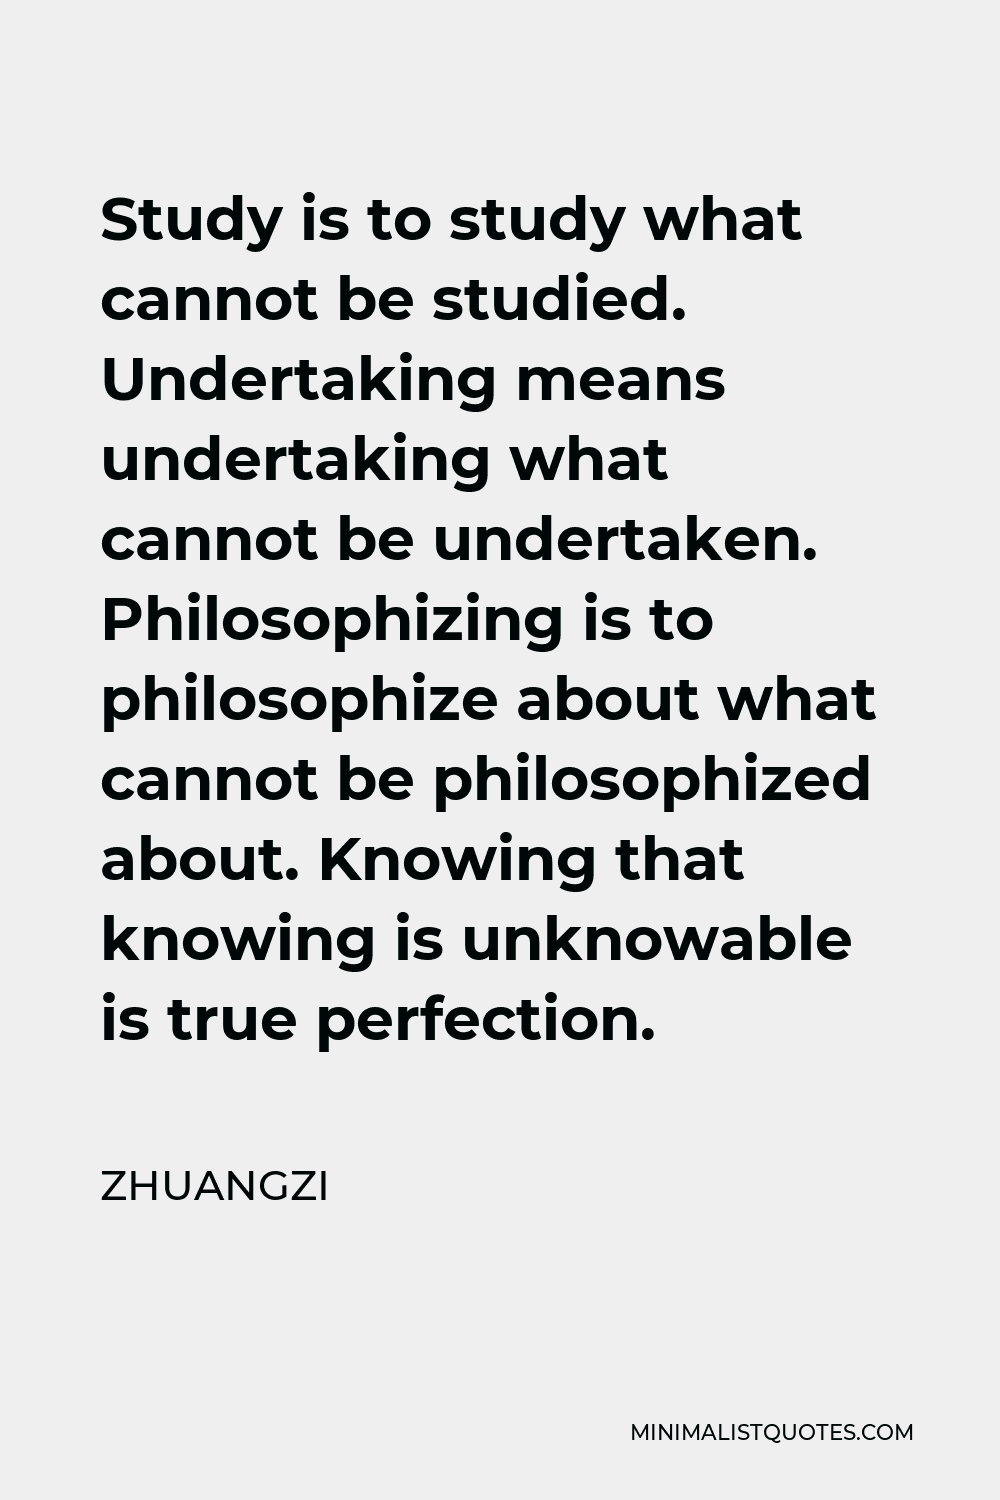 Zhuangzi Quote - Study is to study what cannot be studied. Undertaking means undertaking what cannot be undertaken. Philosophizing is to philosophize about what cannot be philosophized about. Knowing that knowing is unknowable is true perfection.